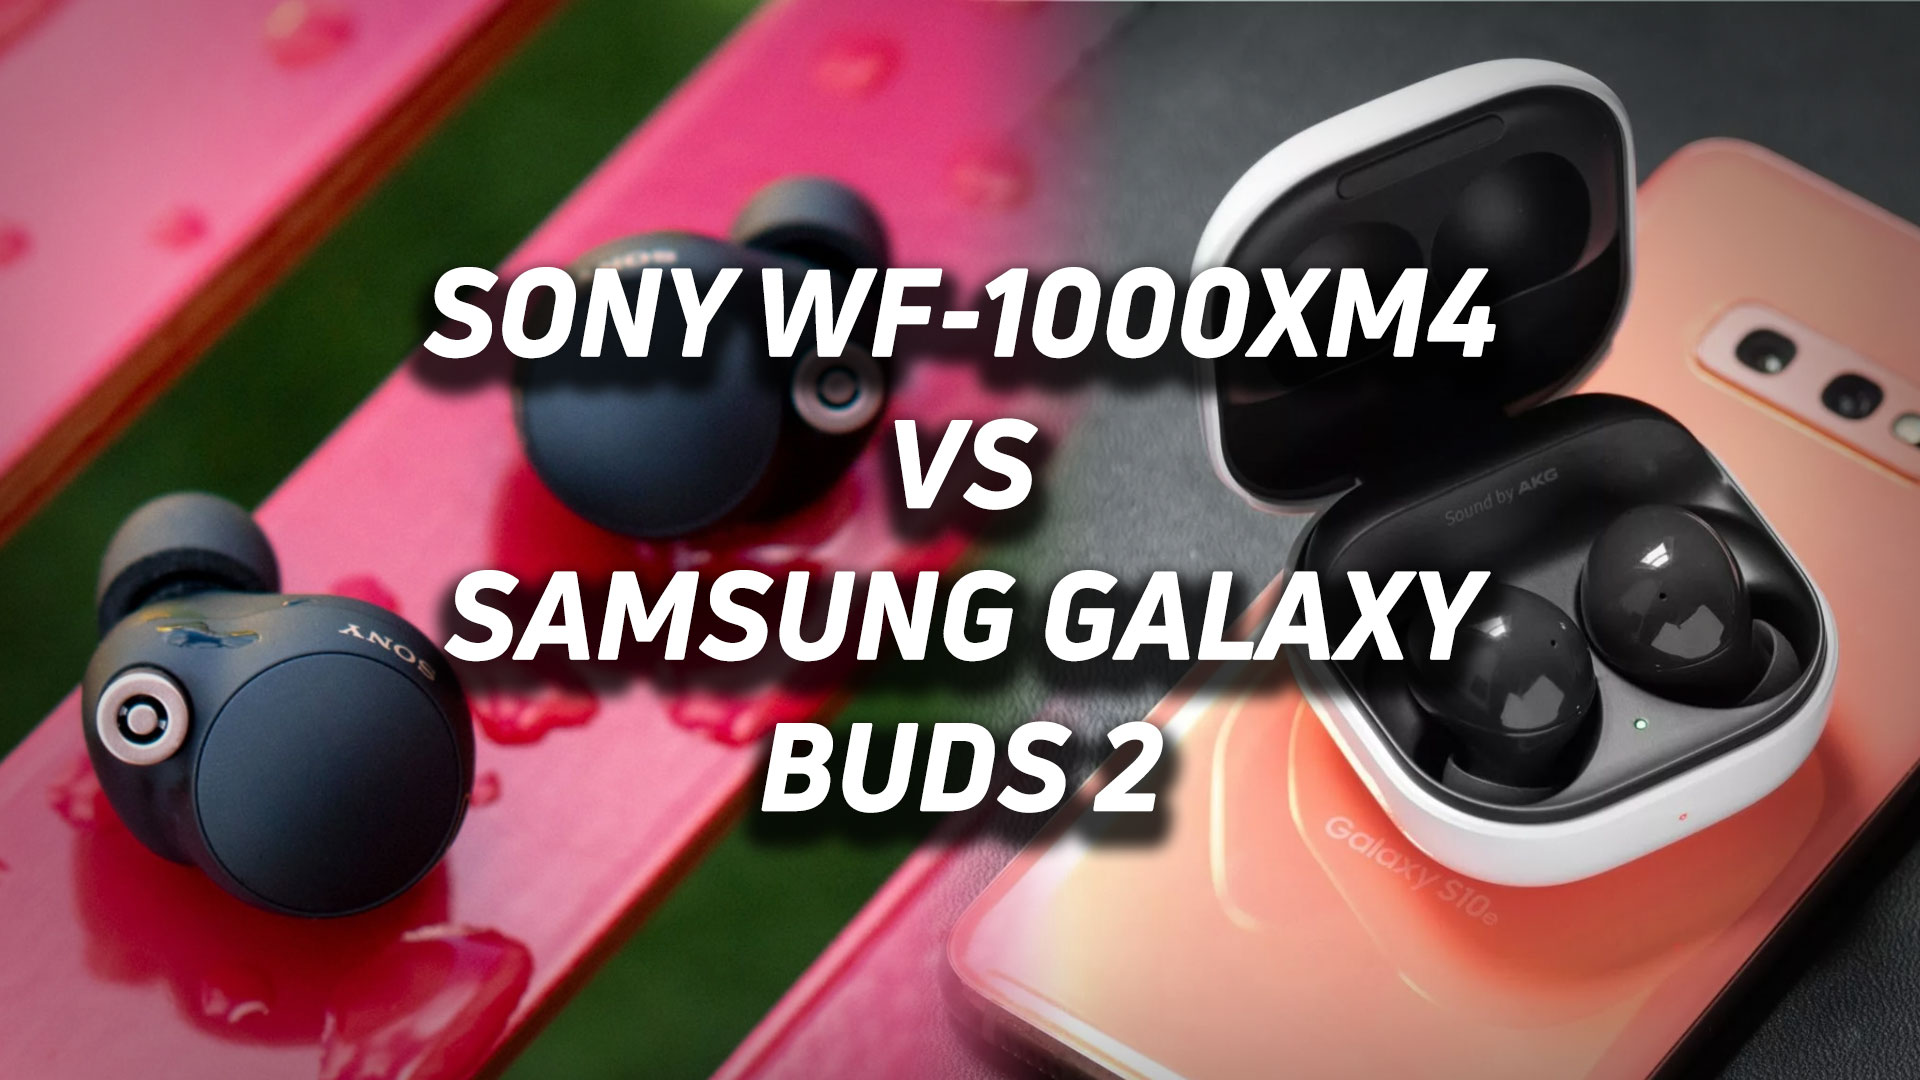 A blended image of the Sony WF-1000XM4 and Samsung Galaxy Buds 2 with versus text overlaid.